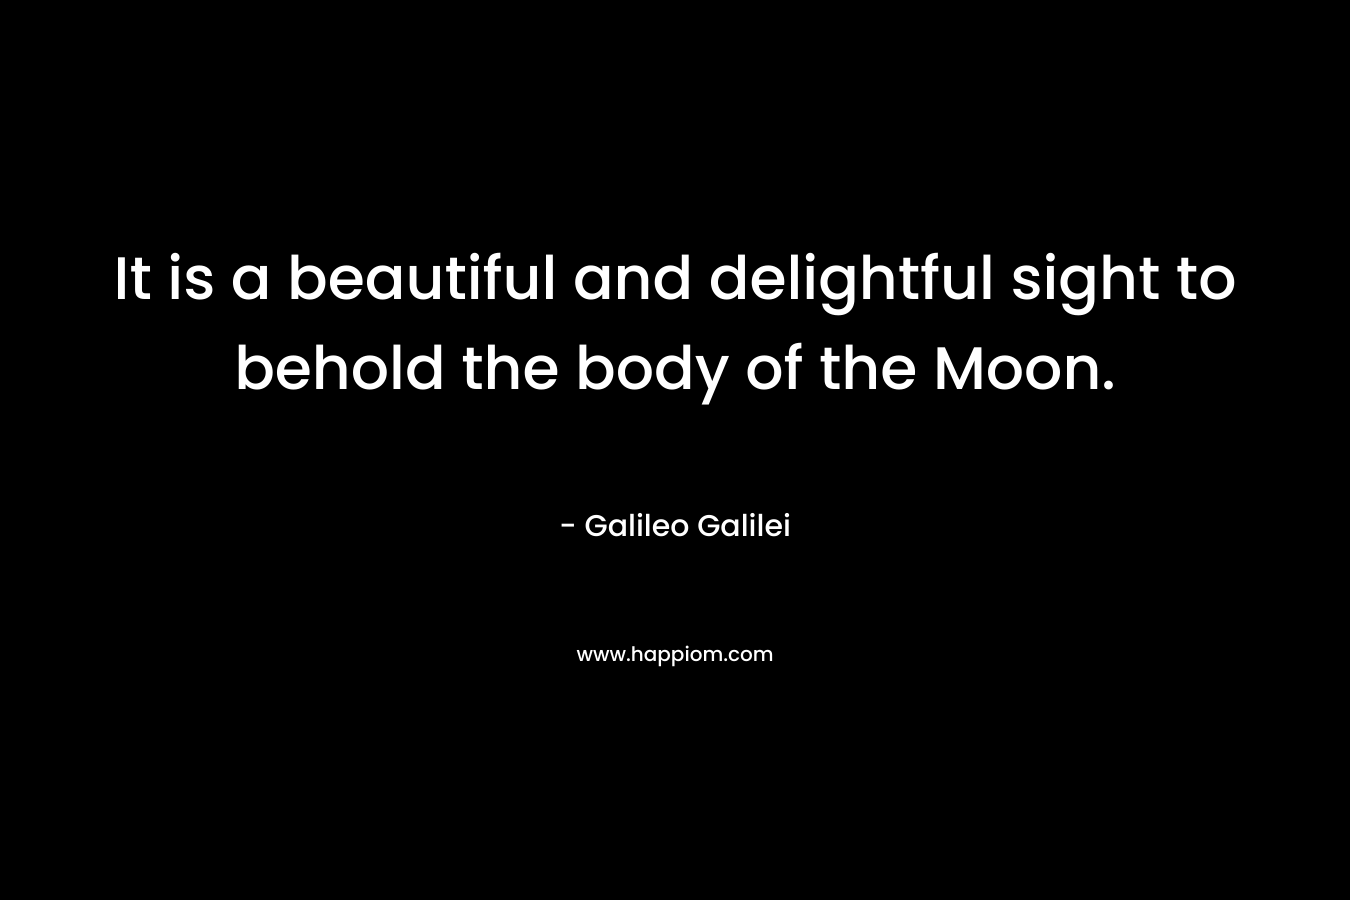 It is a beautiful and delightful sight to behold the body of the Moon. – Galileo Galilei